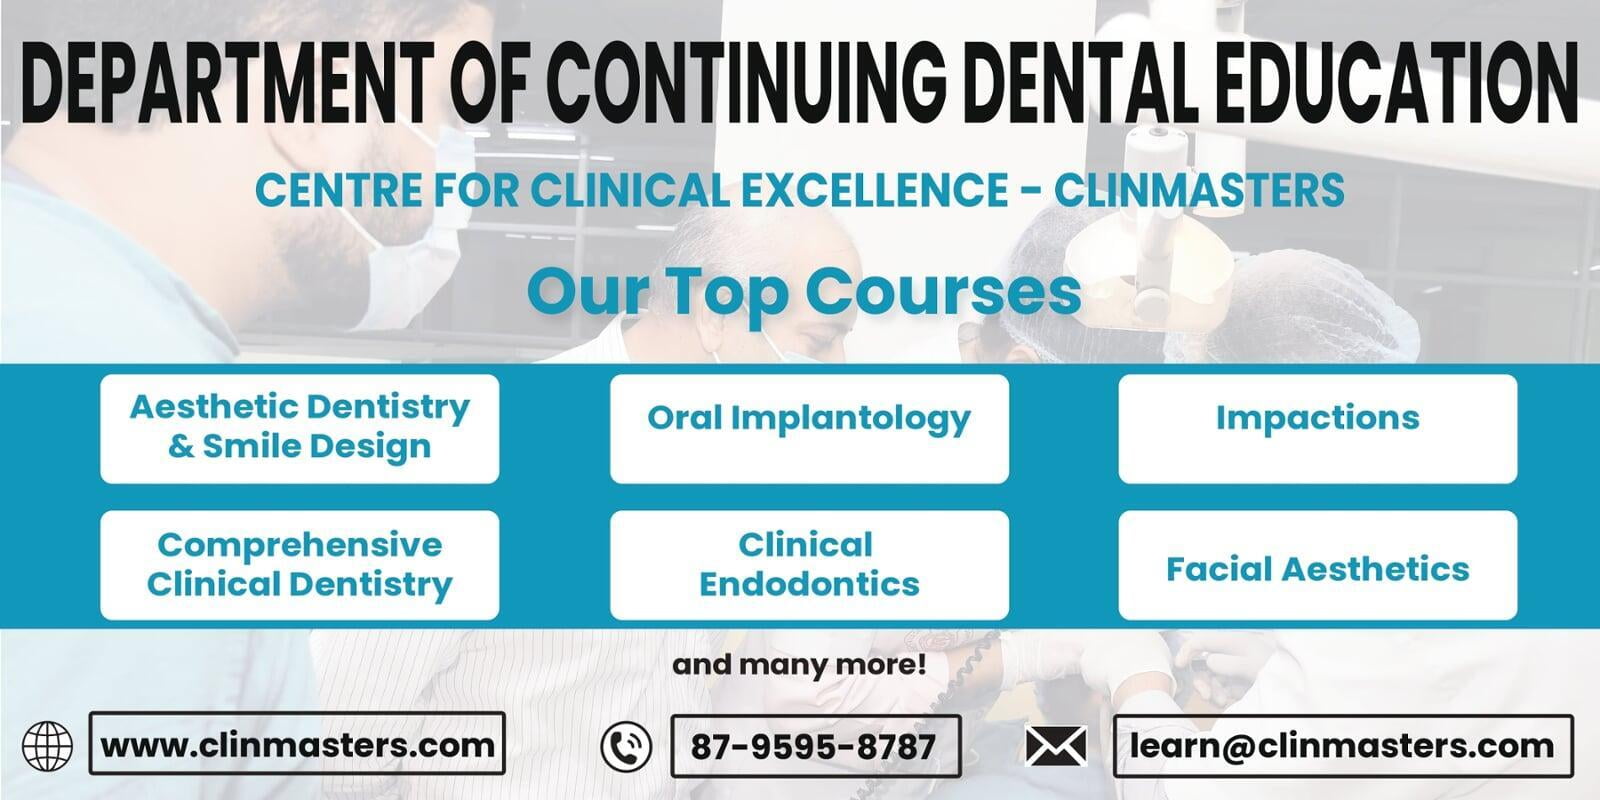 Centre for Clinical Excellence in Dentistry